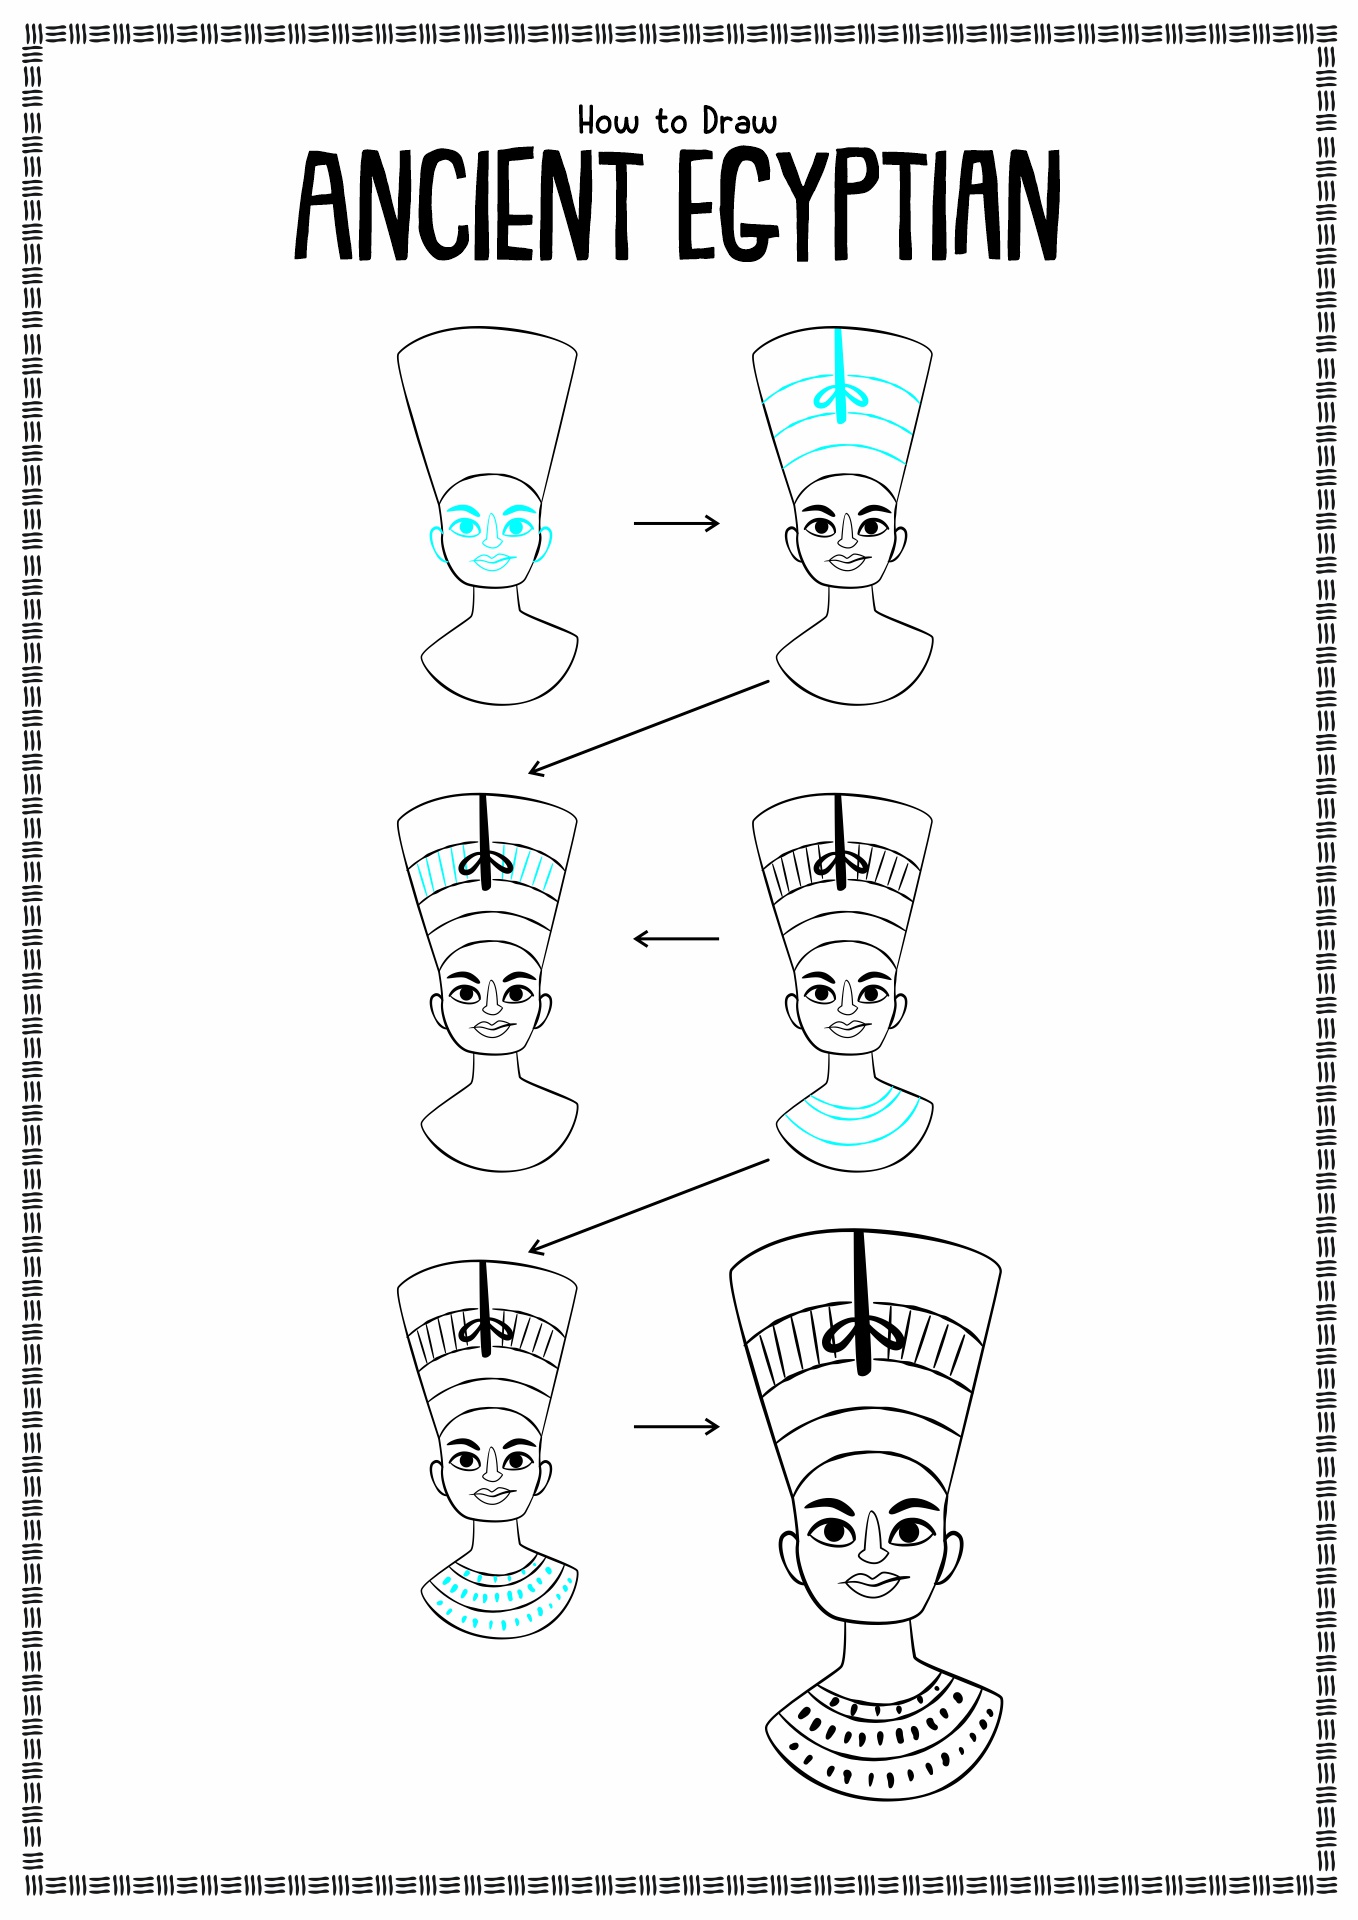 How to Draw Ancient Egyptian People Image